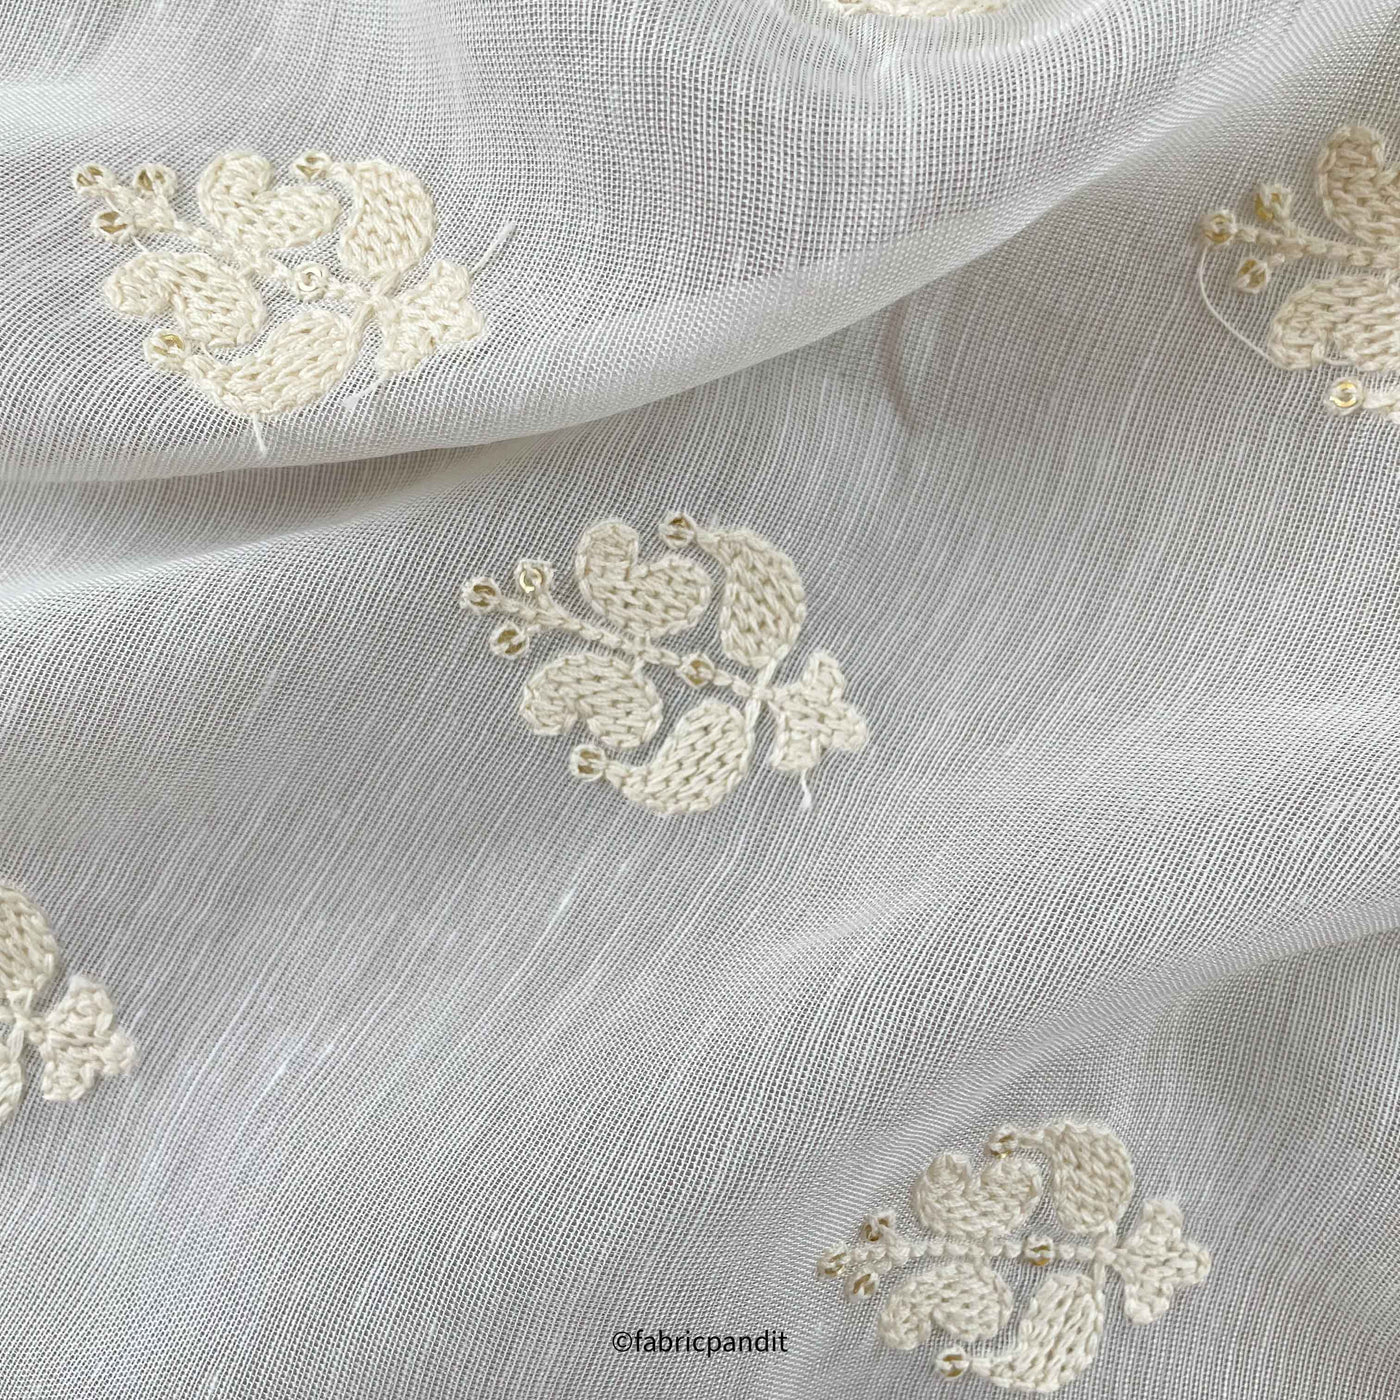 Fabric Pandit Fabric White Dyeable Abstract Floral Embroidered Fine Chanderi Silk Fabric (Width 46 Inches)